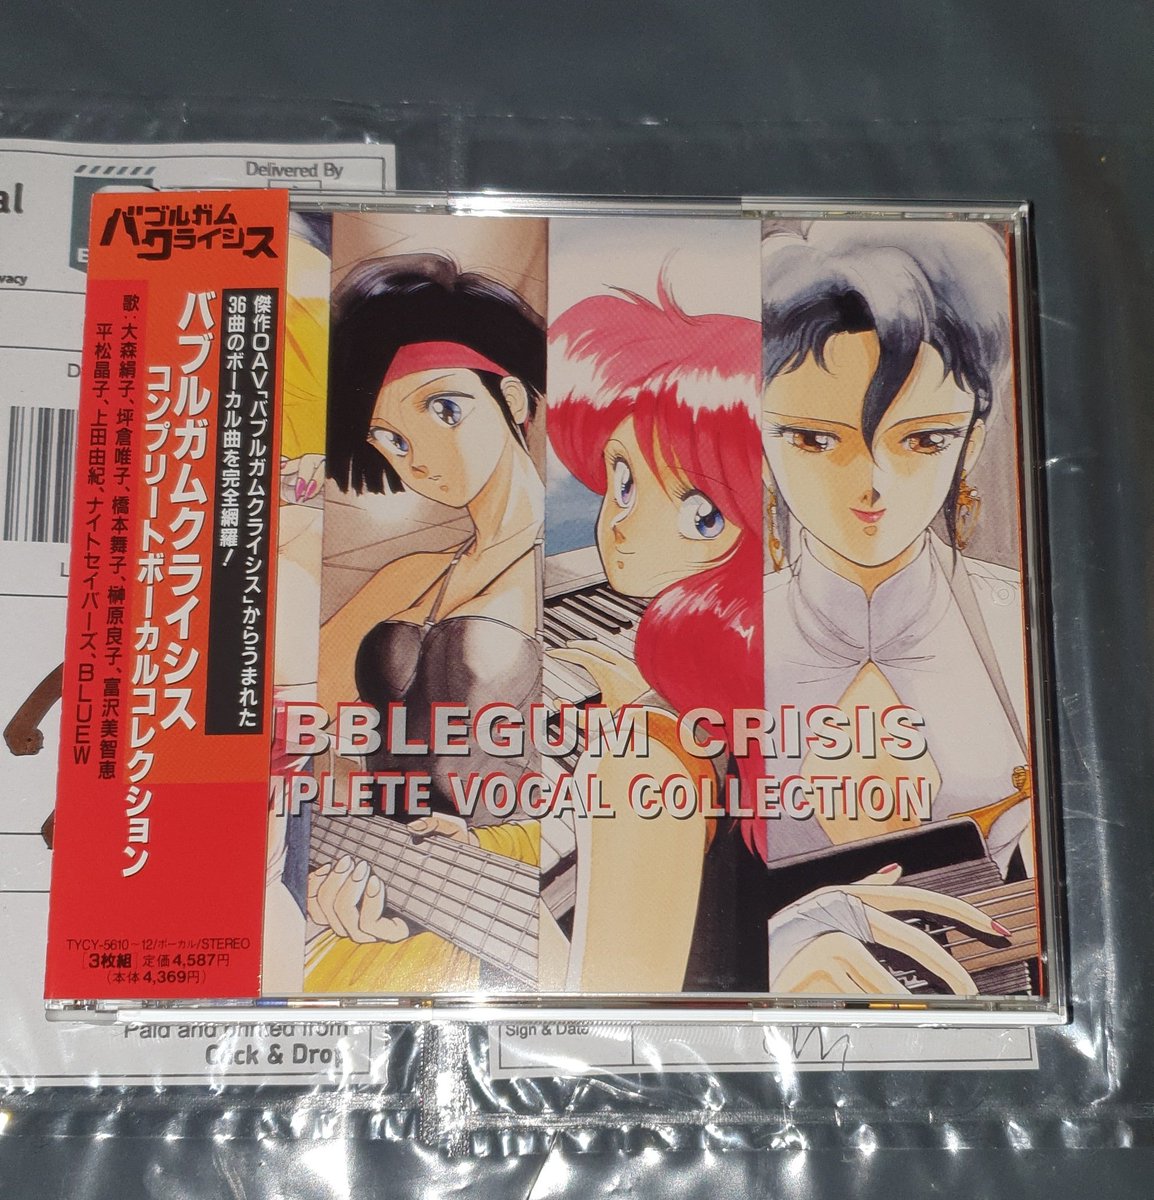 Such an awesome soundtrack!😎👍
#bubblegumcrisis #80sanime